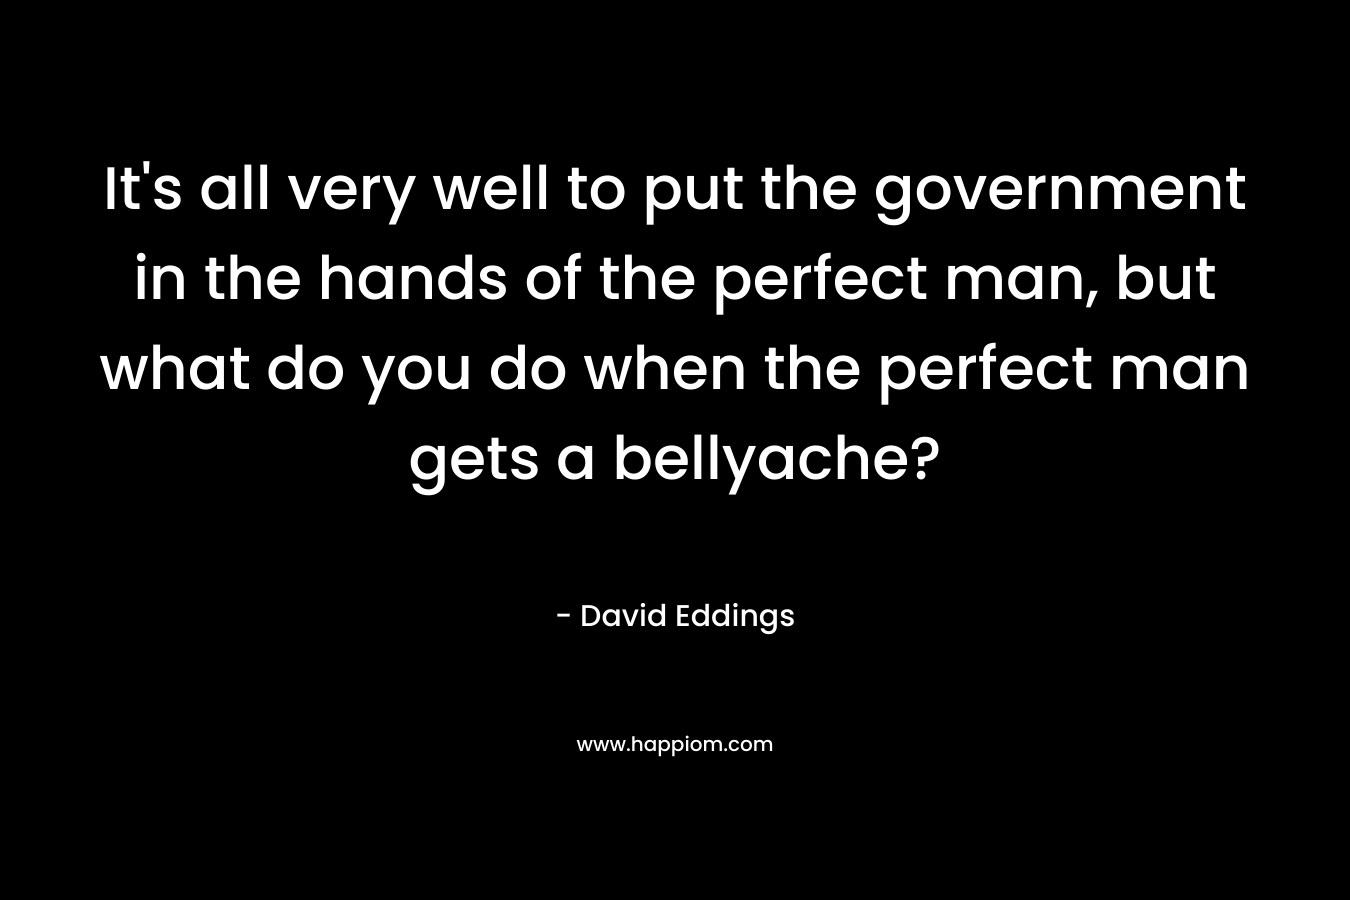 It's all very well to put the government in the hands of the perfect man, but what do you do when the perfect man gets a bellyache?